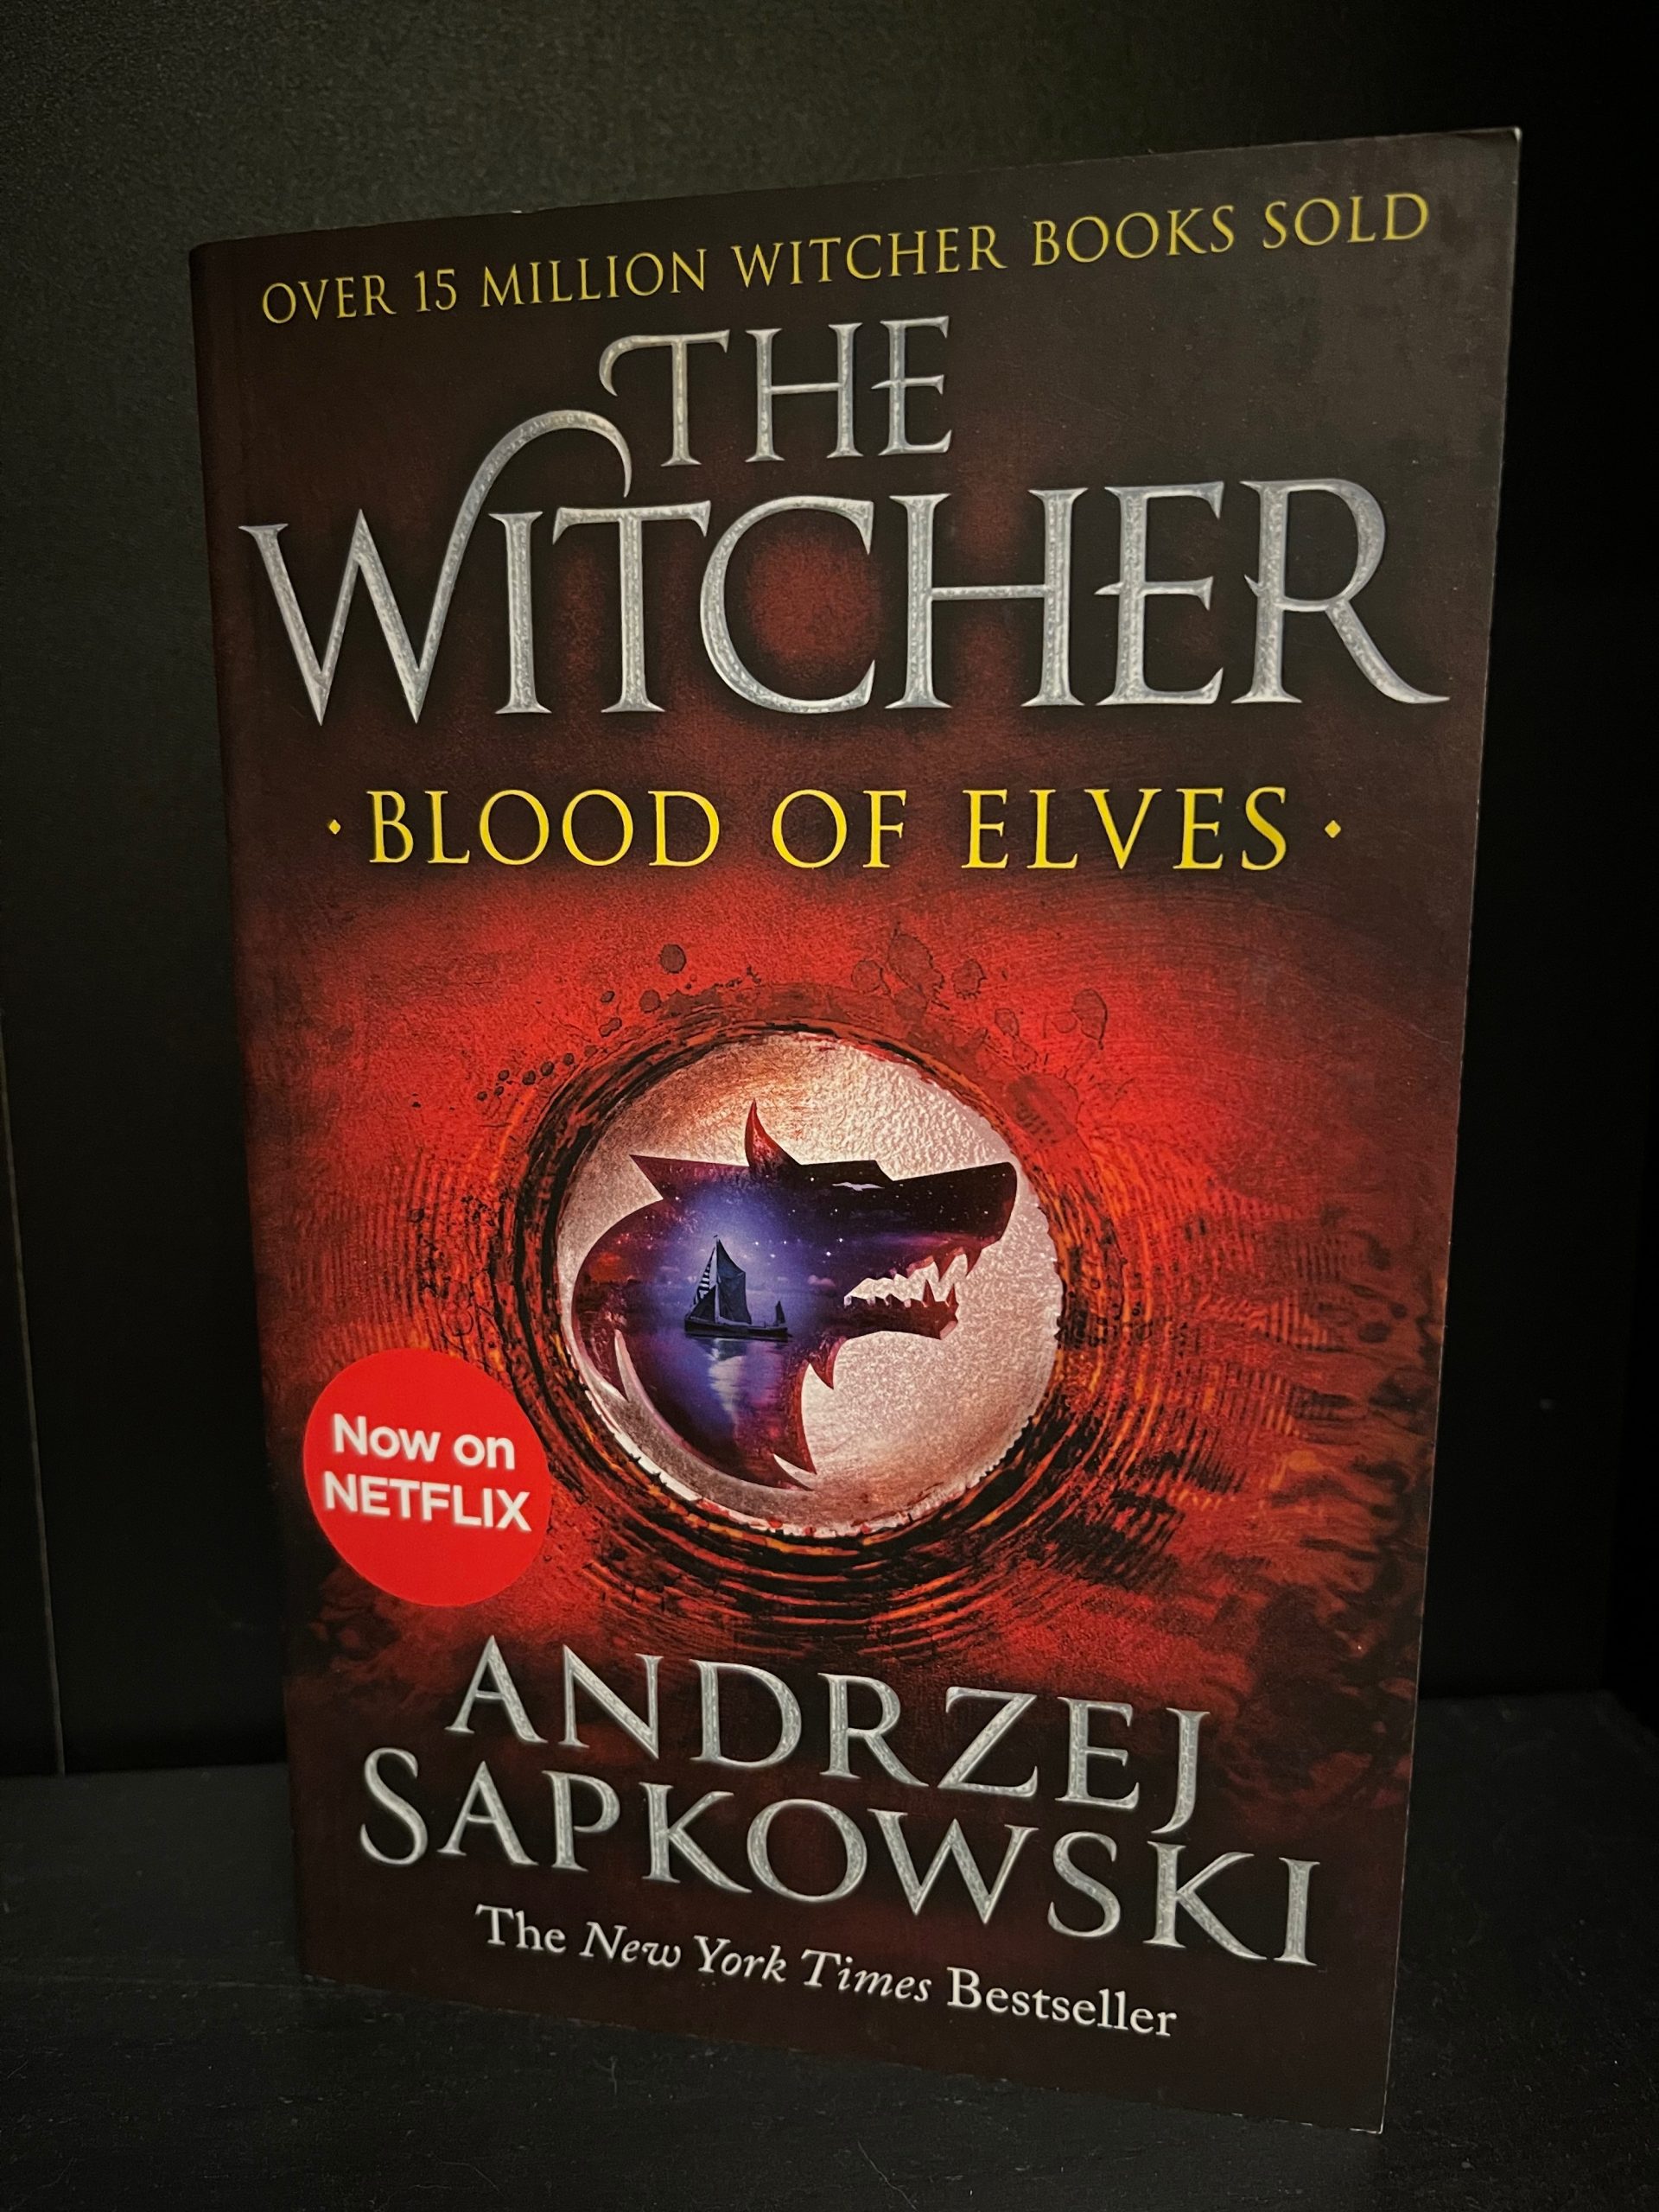 The Witcher blood of elves